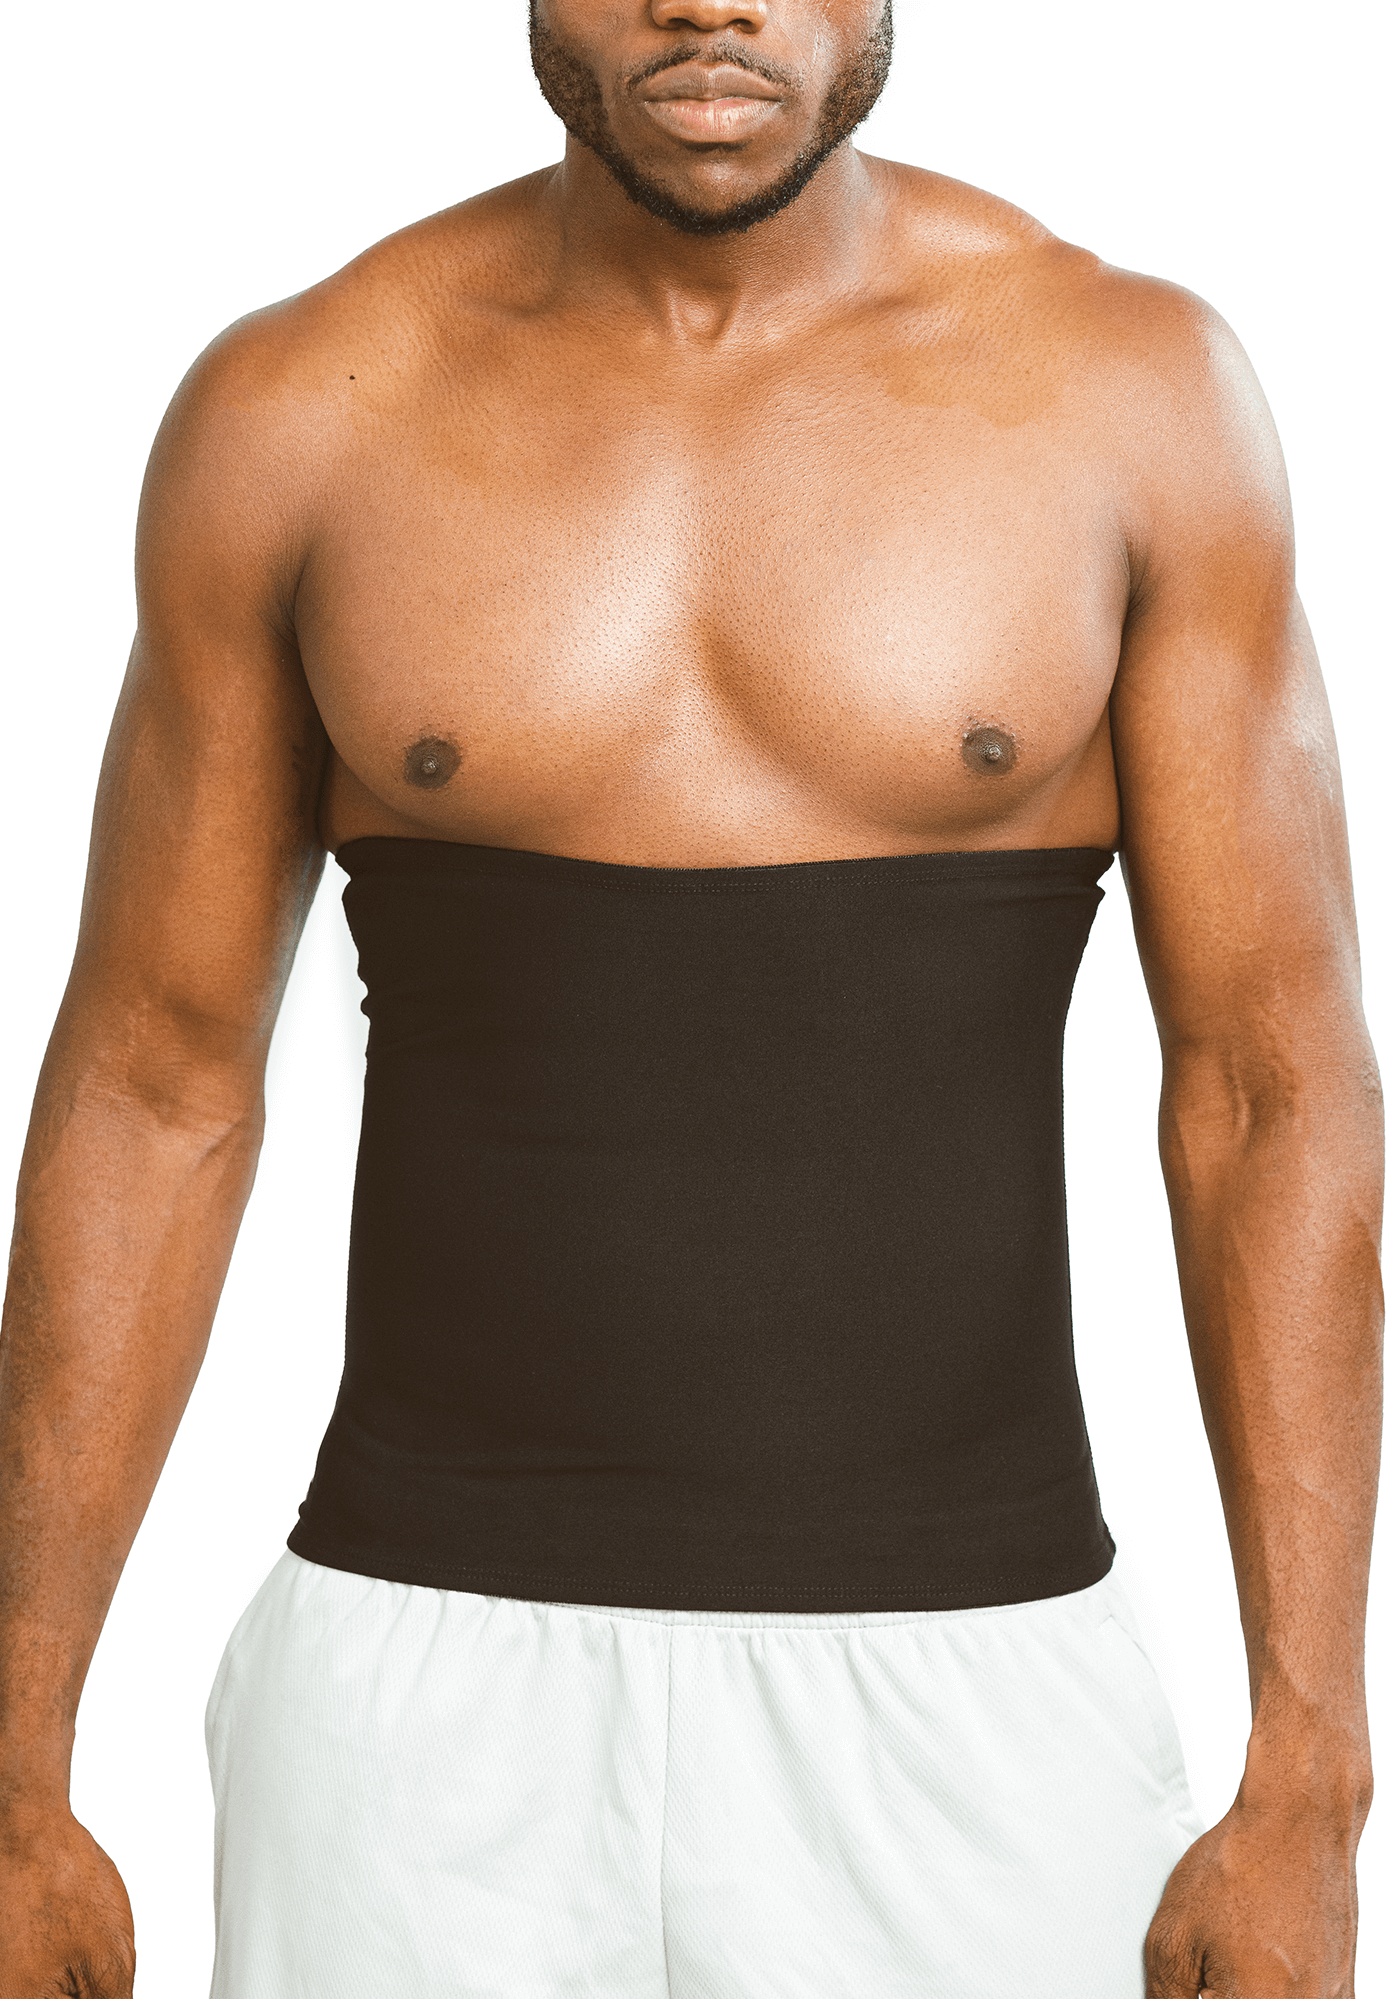 Lose Weight And Get Fit With The Sweat Shaper Premium Waist Trimmer For  Men, Stomach Trainer Sweat Workout Shaper, Gym Exercise Fitness Sport